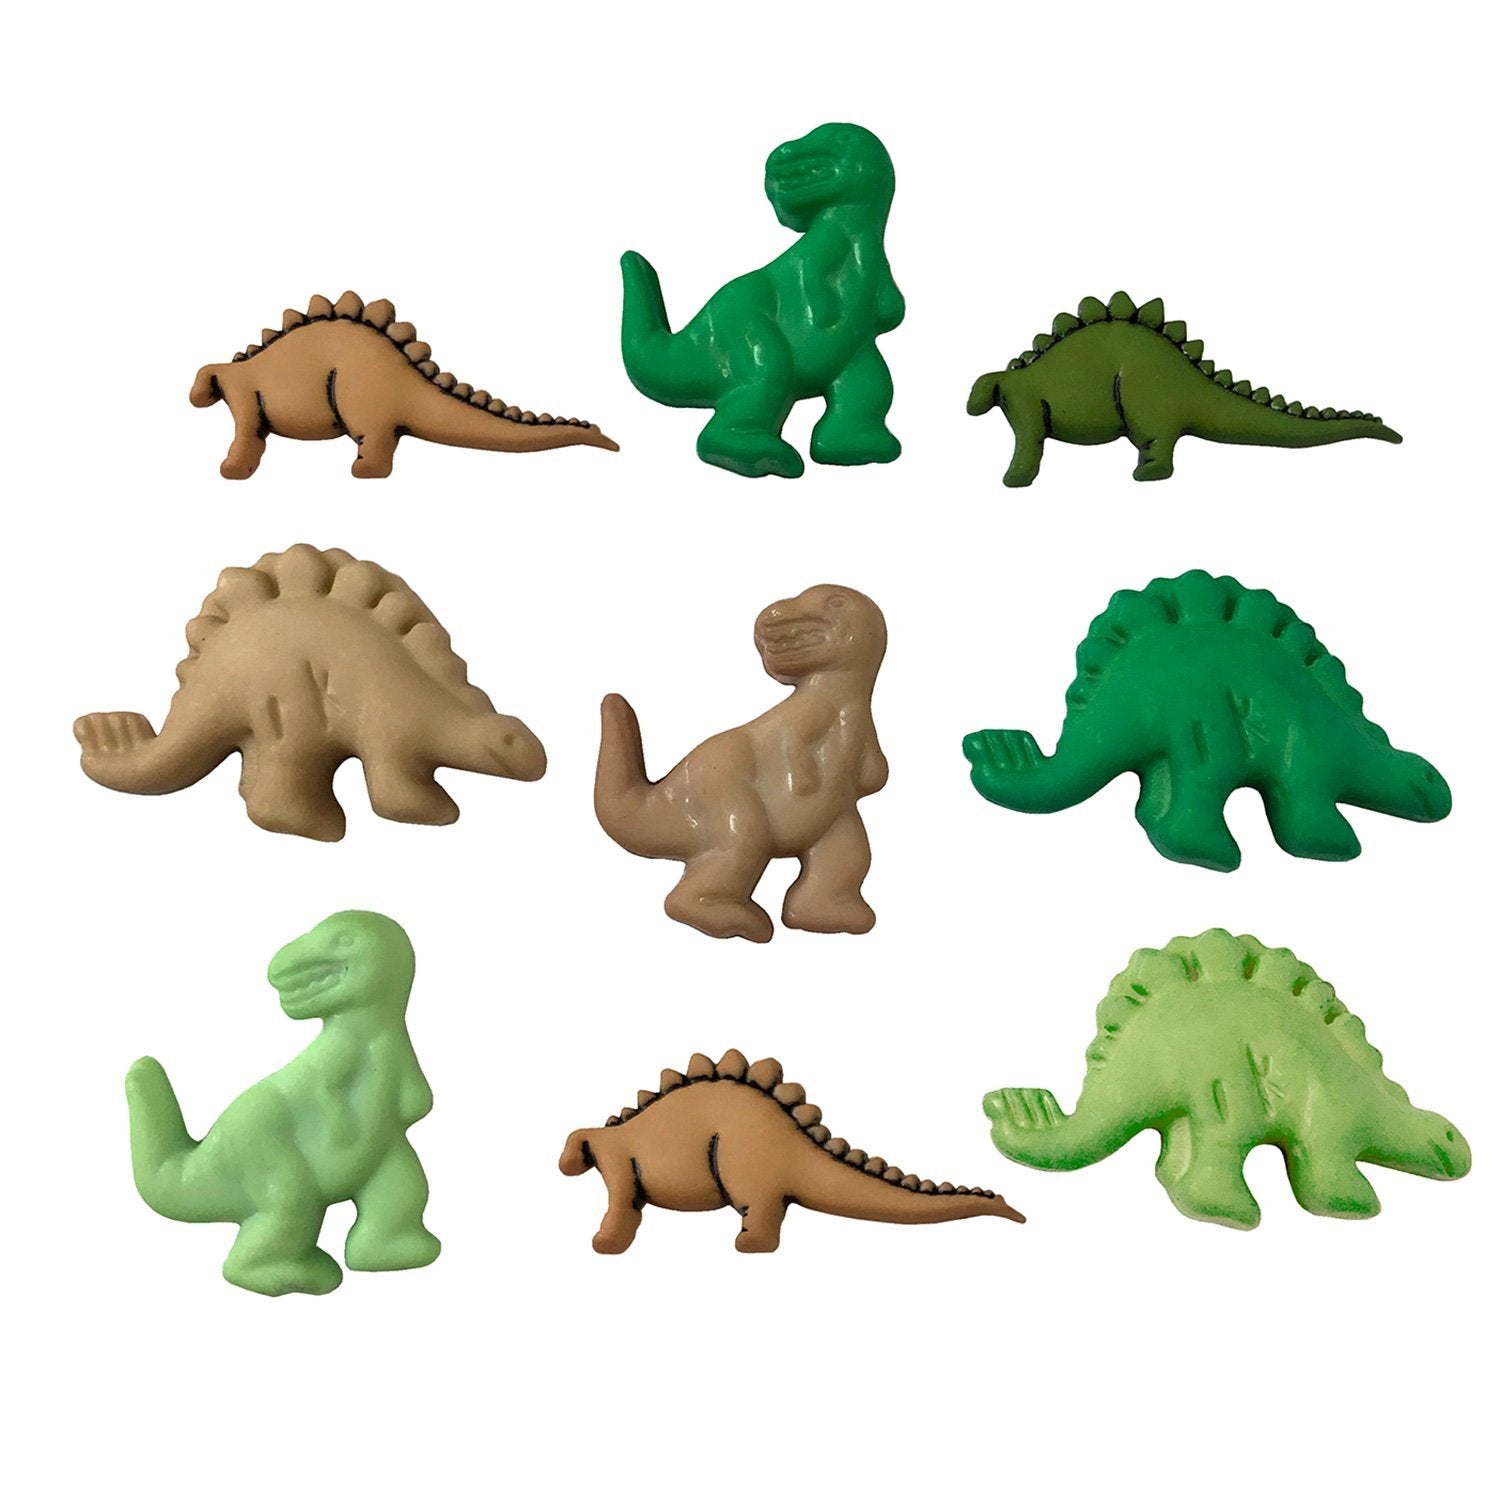 Dinosaurs-4081 - Buttons Galore and More